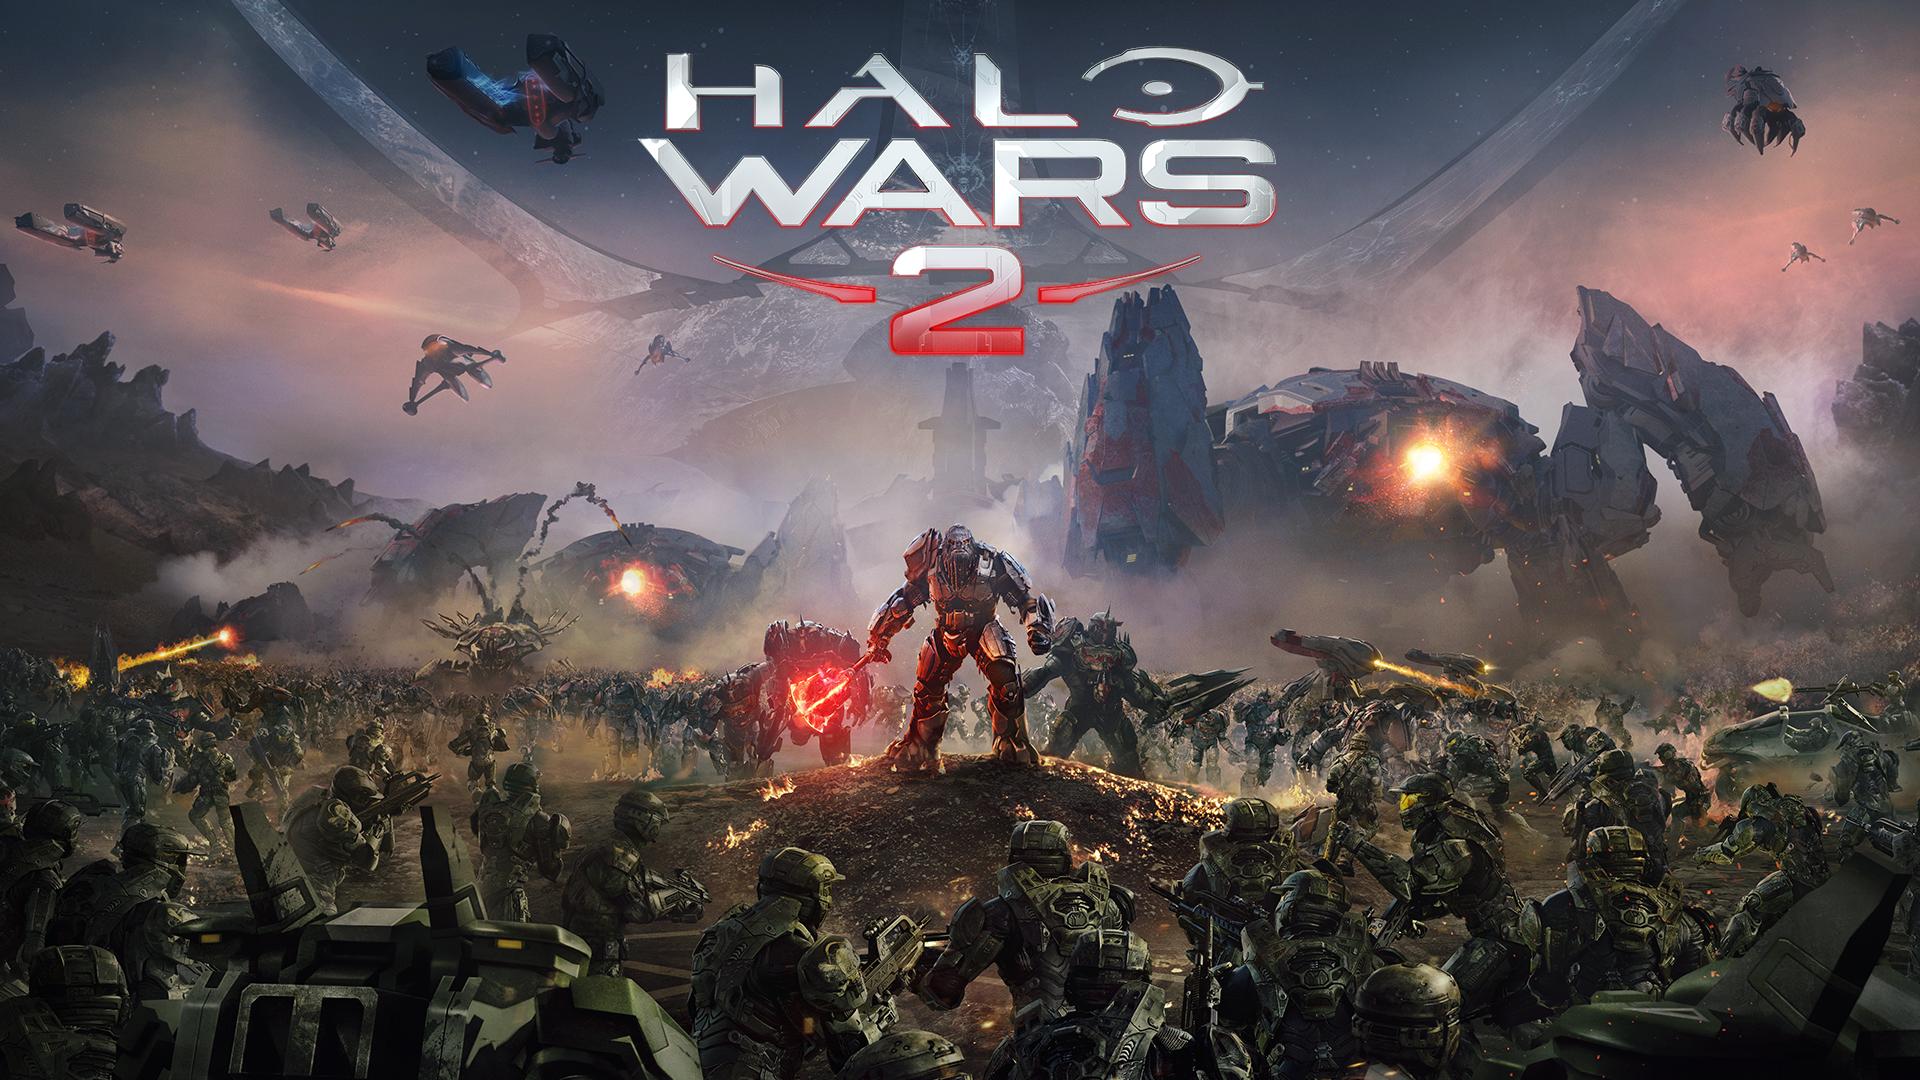 Download Halo Wars 2 Game For Pc